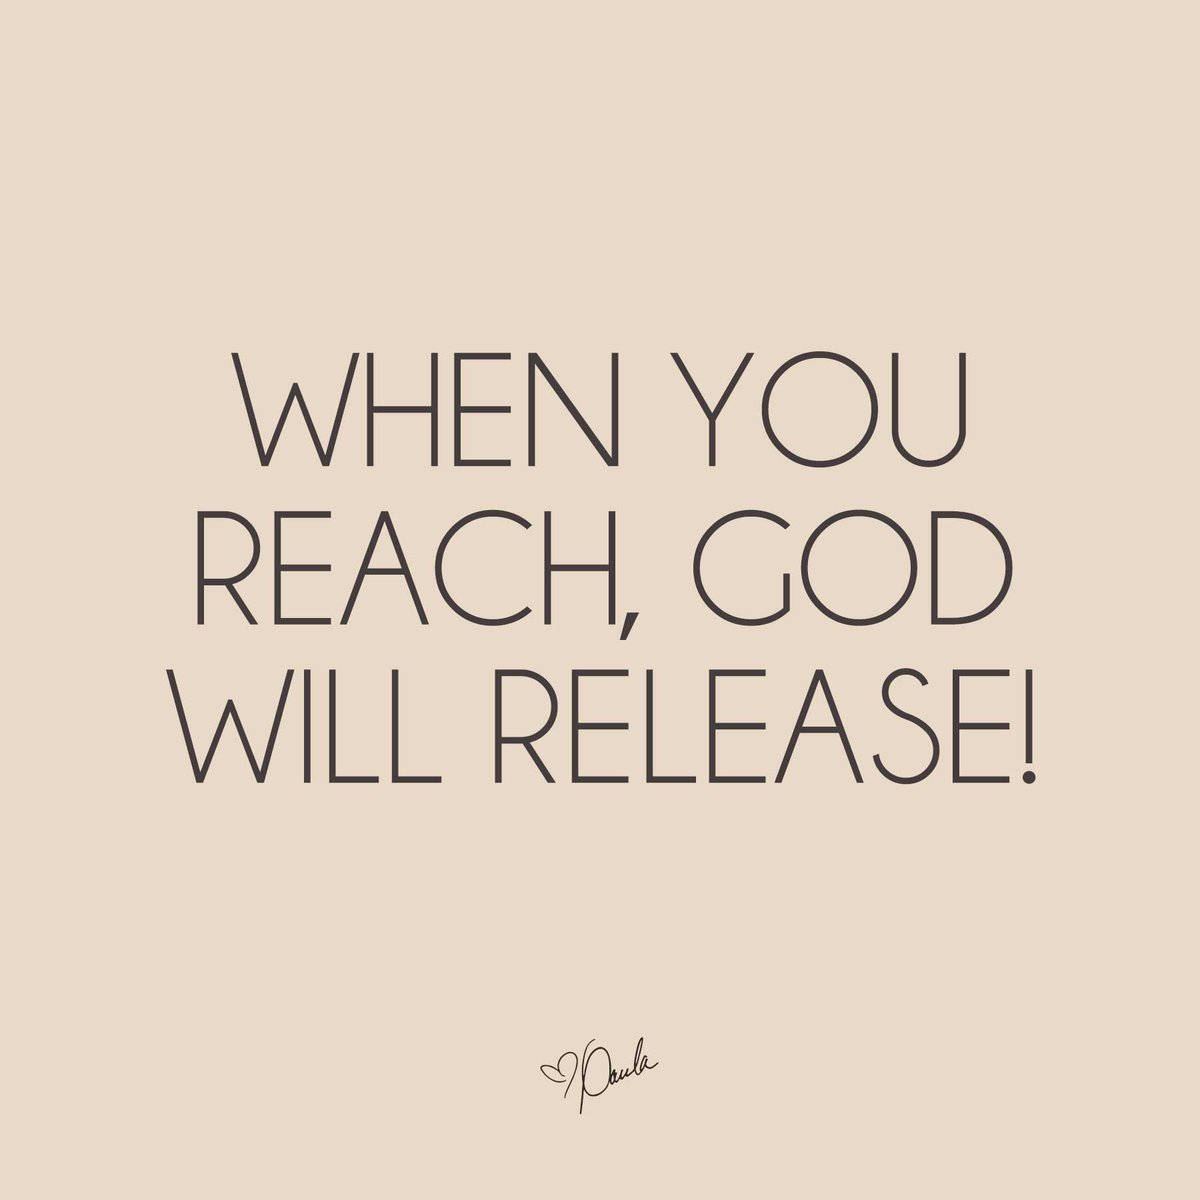 When you reach, God will release! Go for His promises.